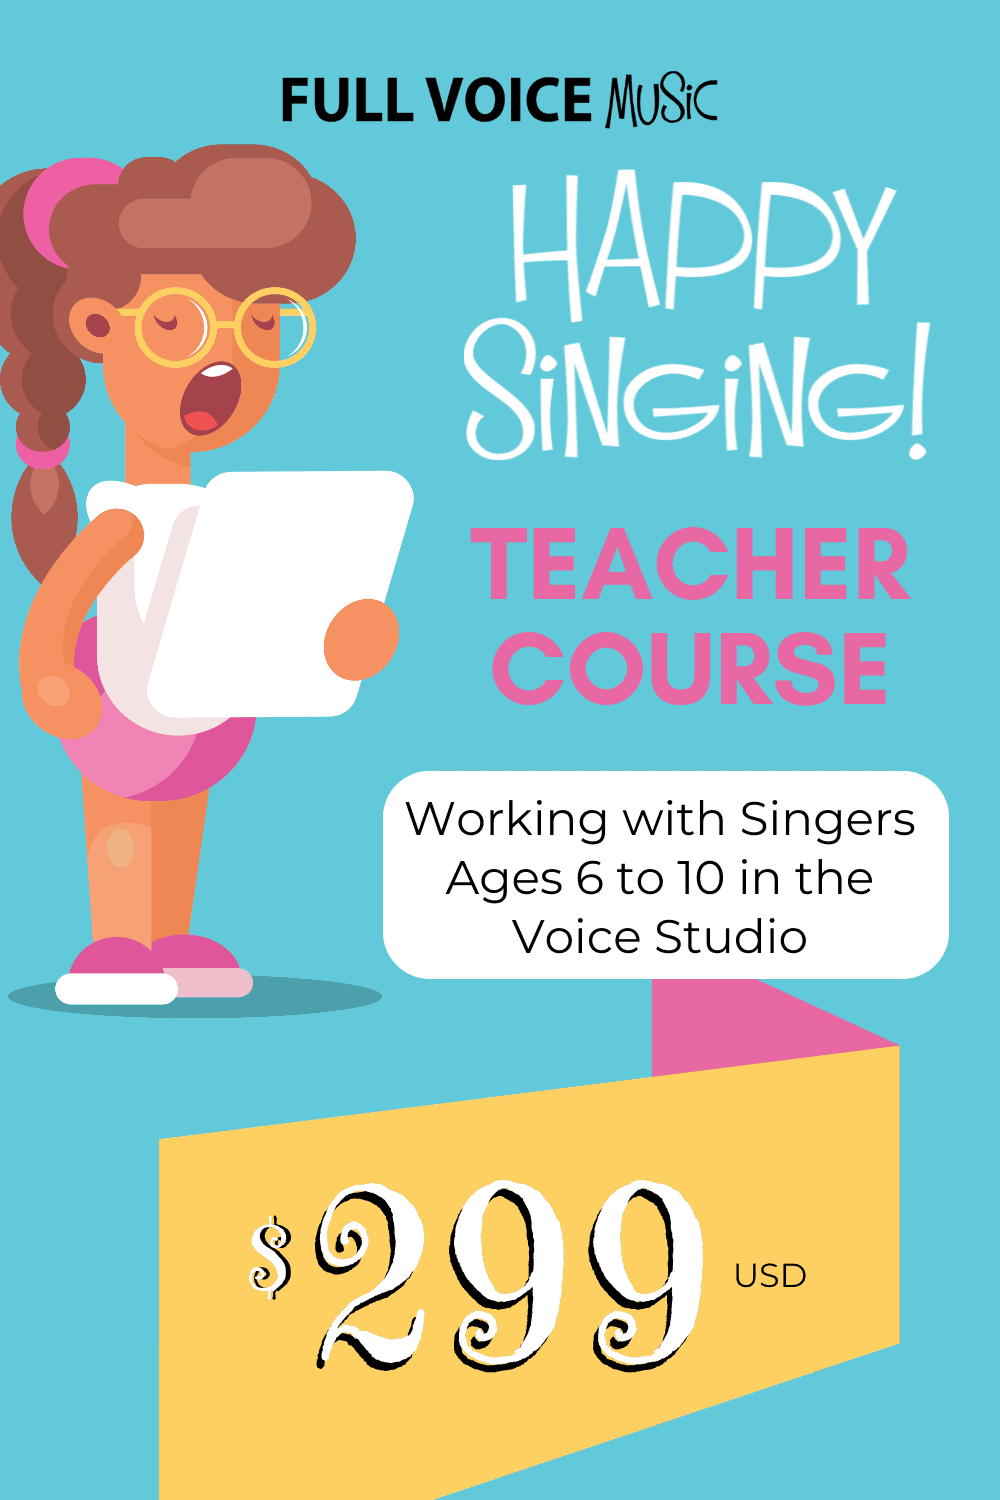 Image of Happy Singing Teacher Course with price $299 USD